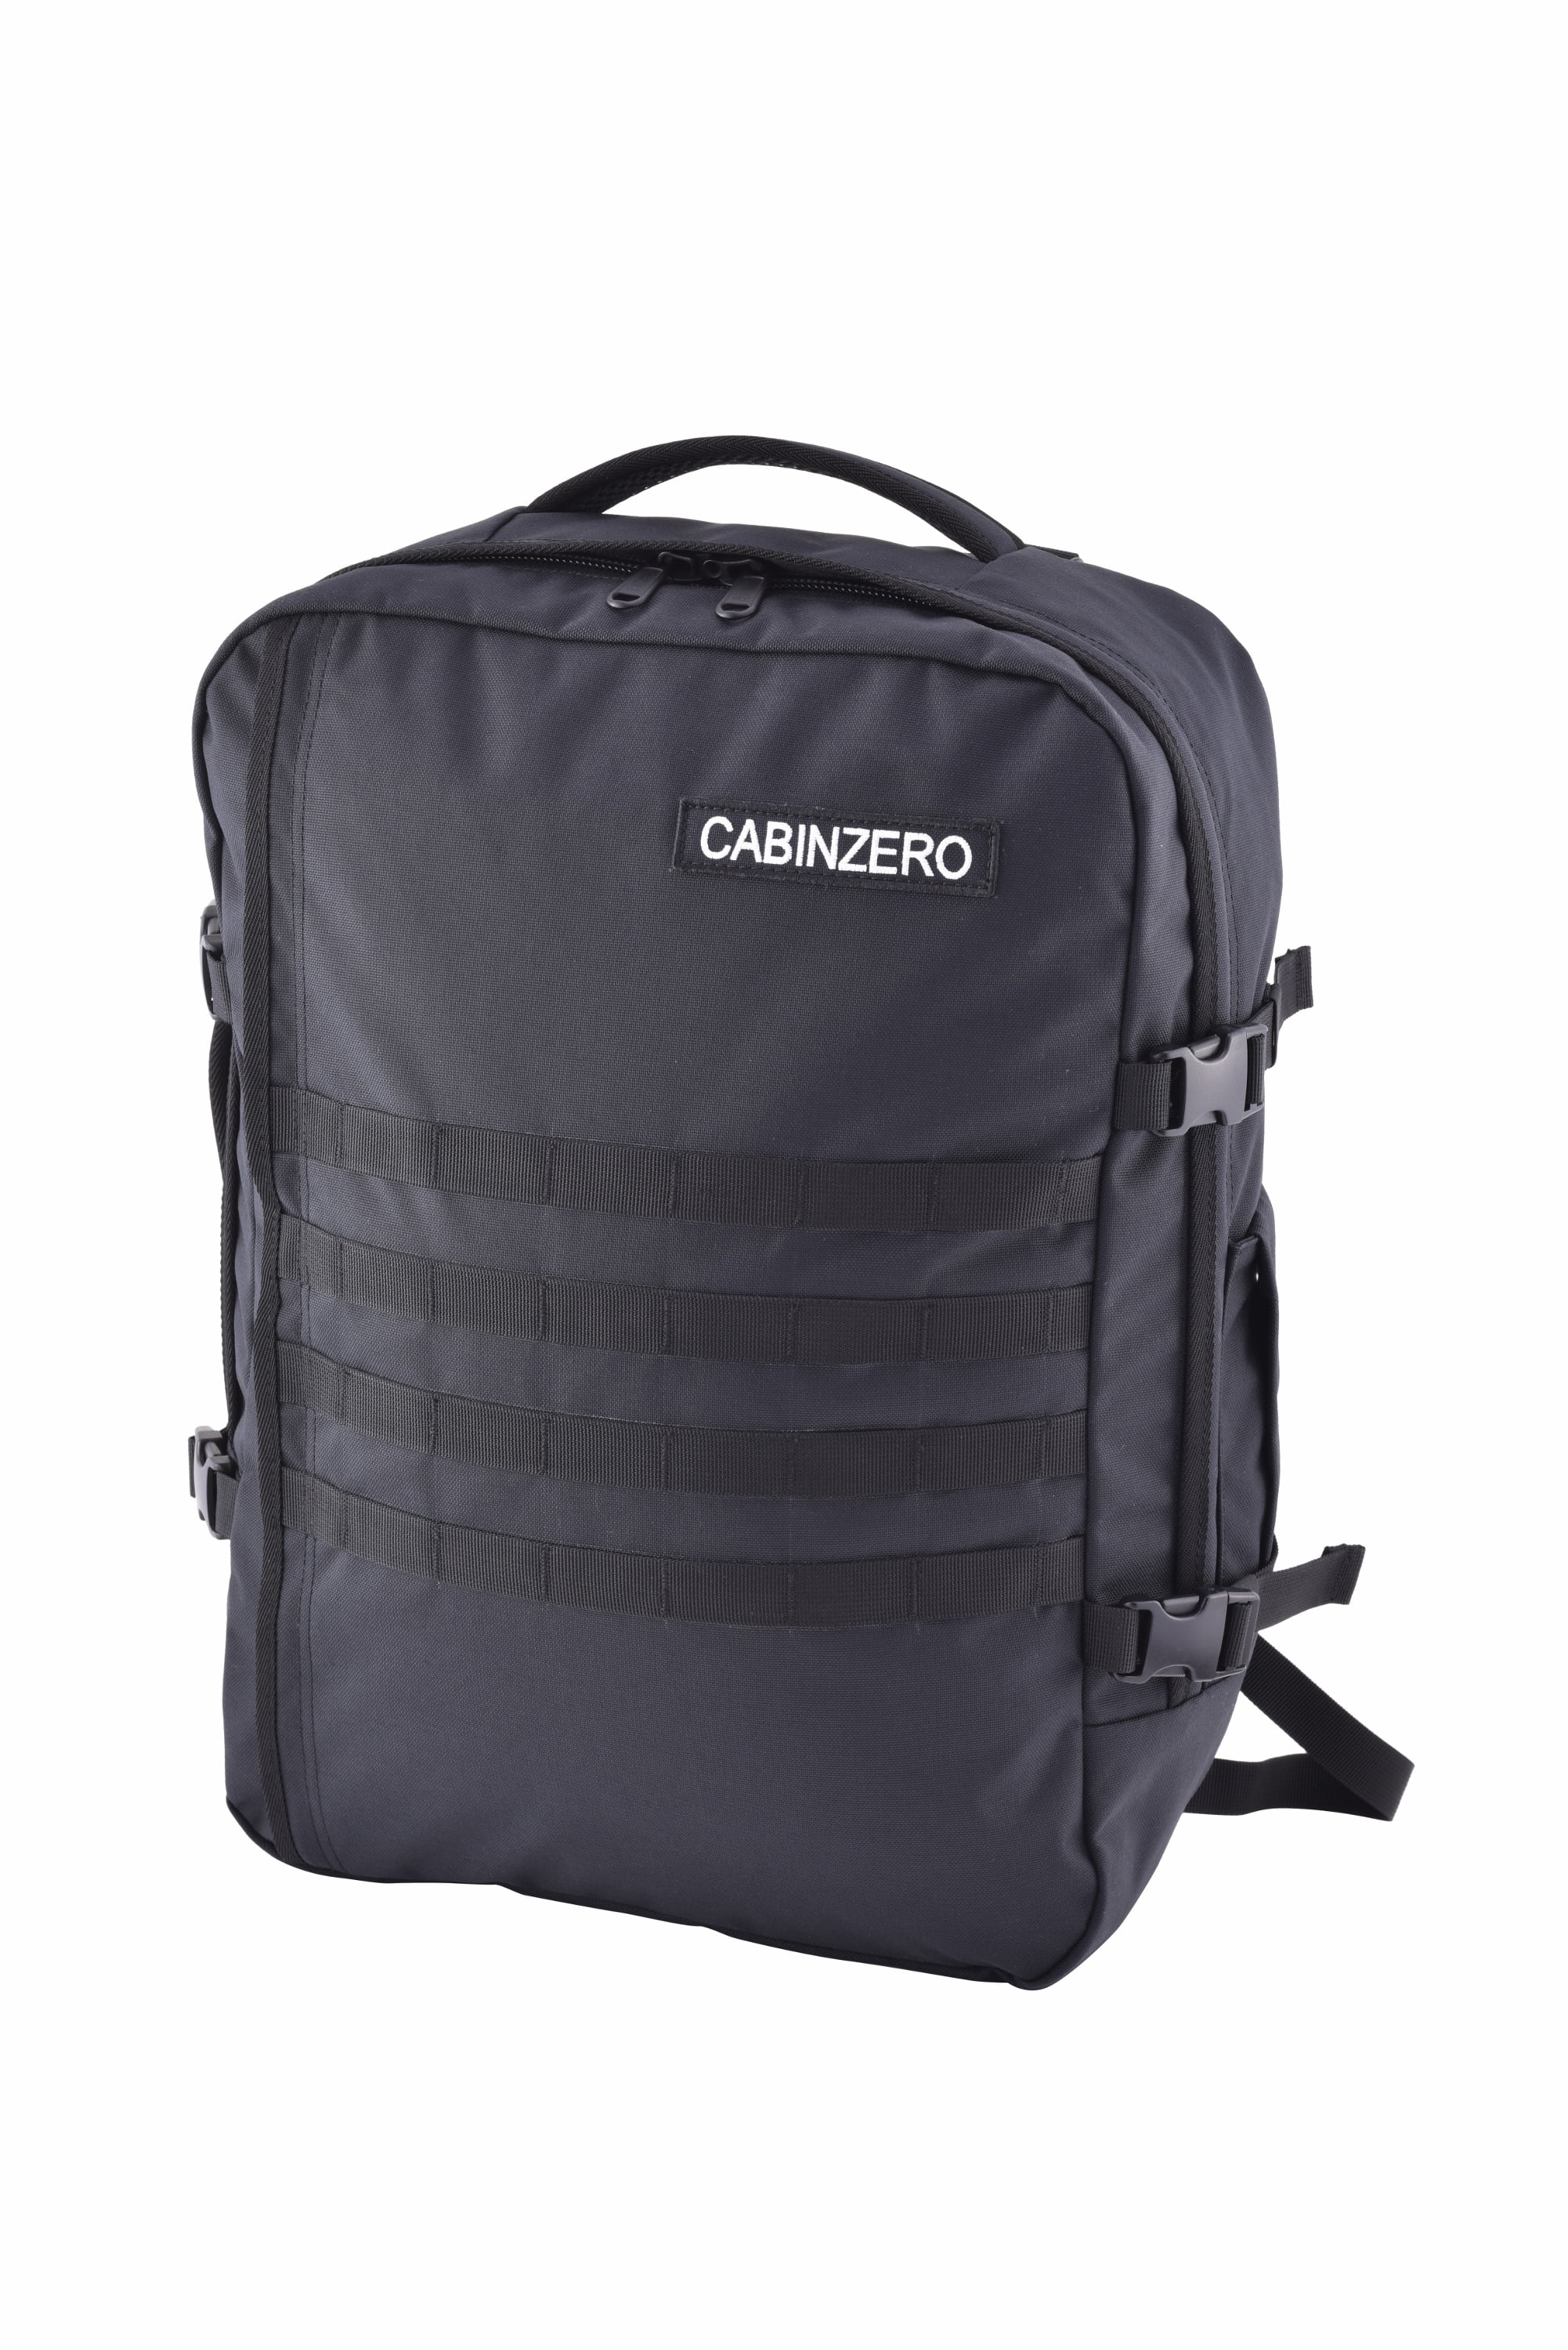 Reviewed: The CabinZero 44L Backpack